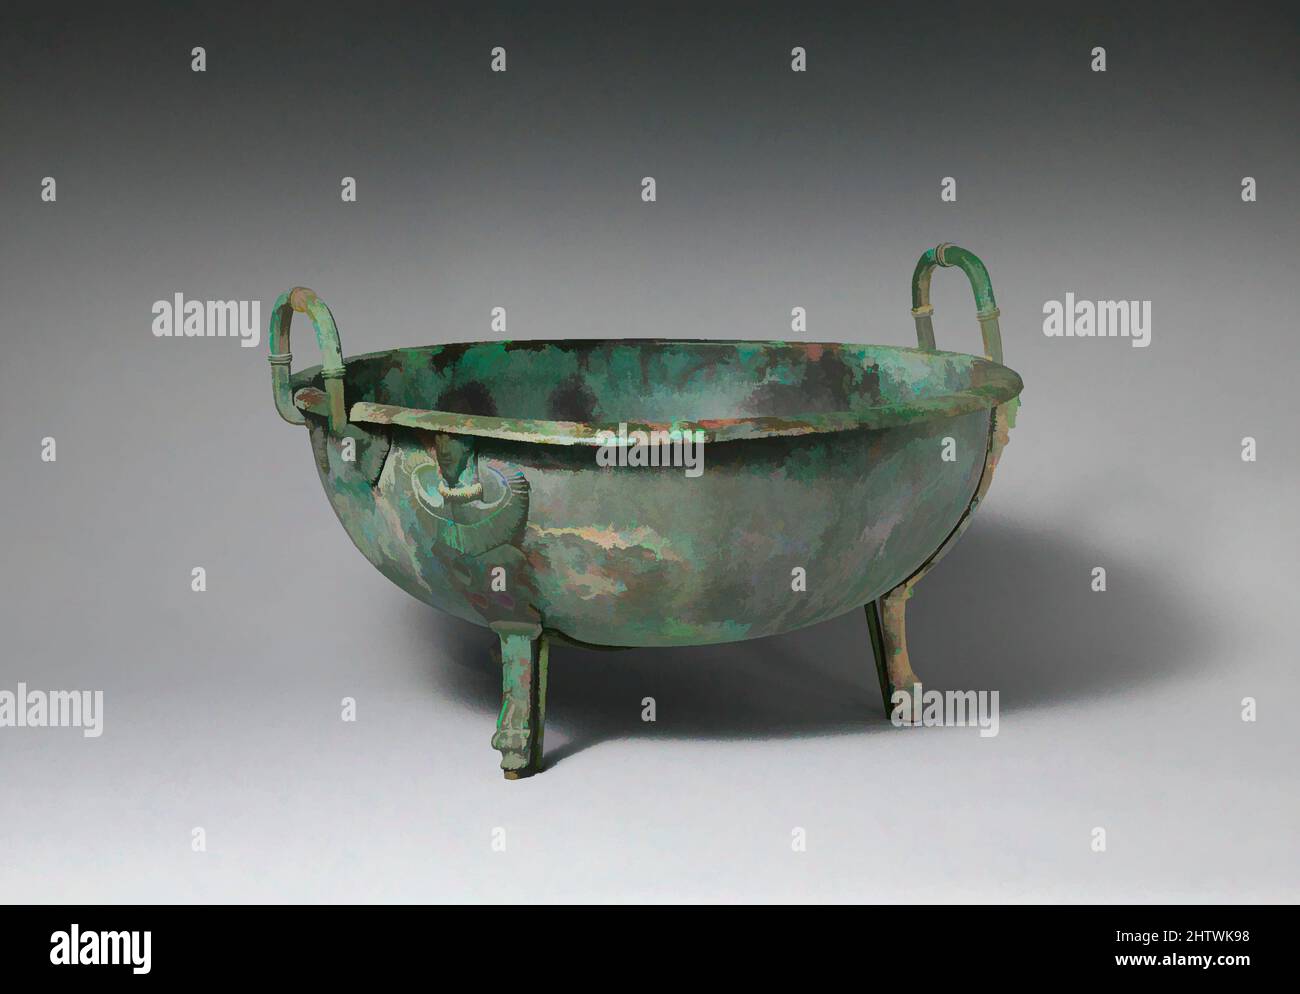 Art inspired by Bronze handled basin with three feet, Archaic, ca. 550 B.C., Etruscan, Bronze, H. 10 1/2 in. (26.7 cm) diameter 23 in. (58.4 cm), Bronzes, Flat rounded rim and three feet ending in paws, Classic works modernized by Artotop with a splash of modernity. Shapes, color and value, eye-catching visual impact on art. Emotions through freedom of artworks in a contemporary way. A timeless message pursuing a wildly creative new direction. Artists turning to the digital medium and creating the Artotop NFT Stock Photo